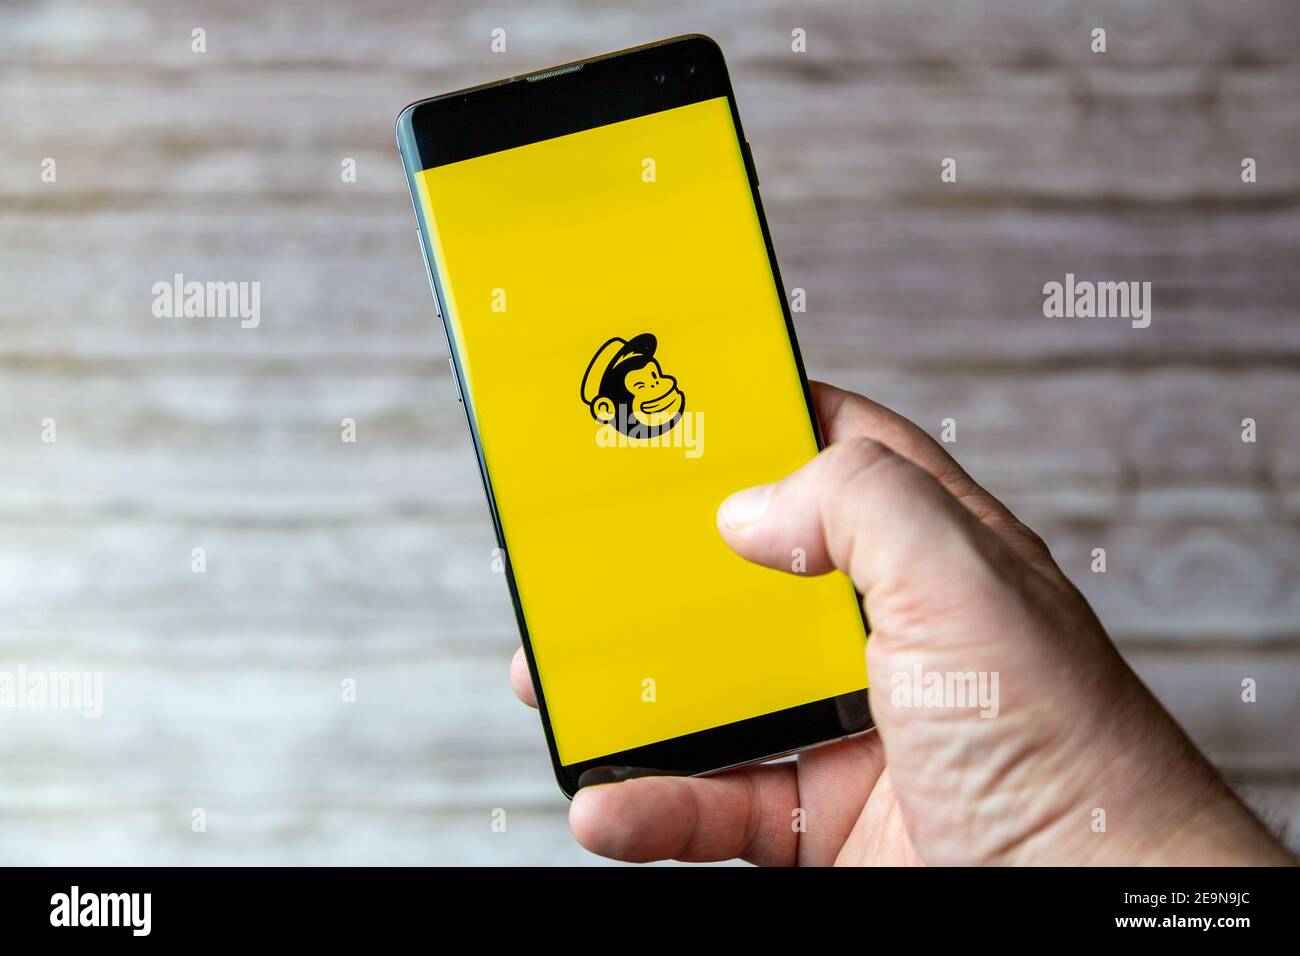 A Mobile phone or cell phone being held showing the Mailchimp app open on screen Stock Photo